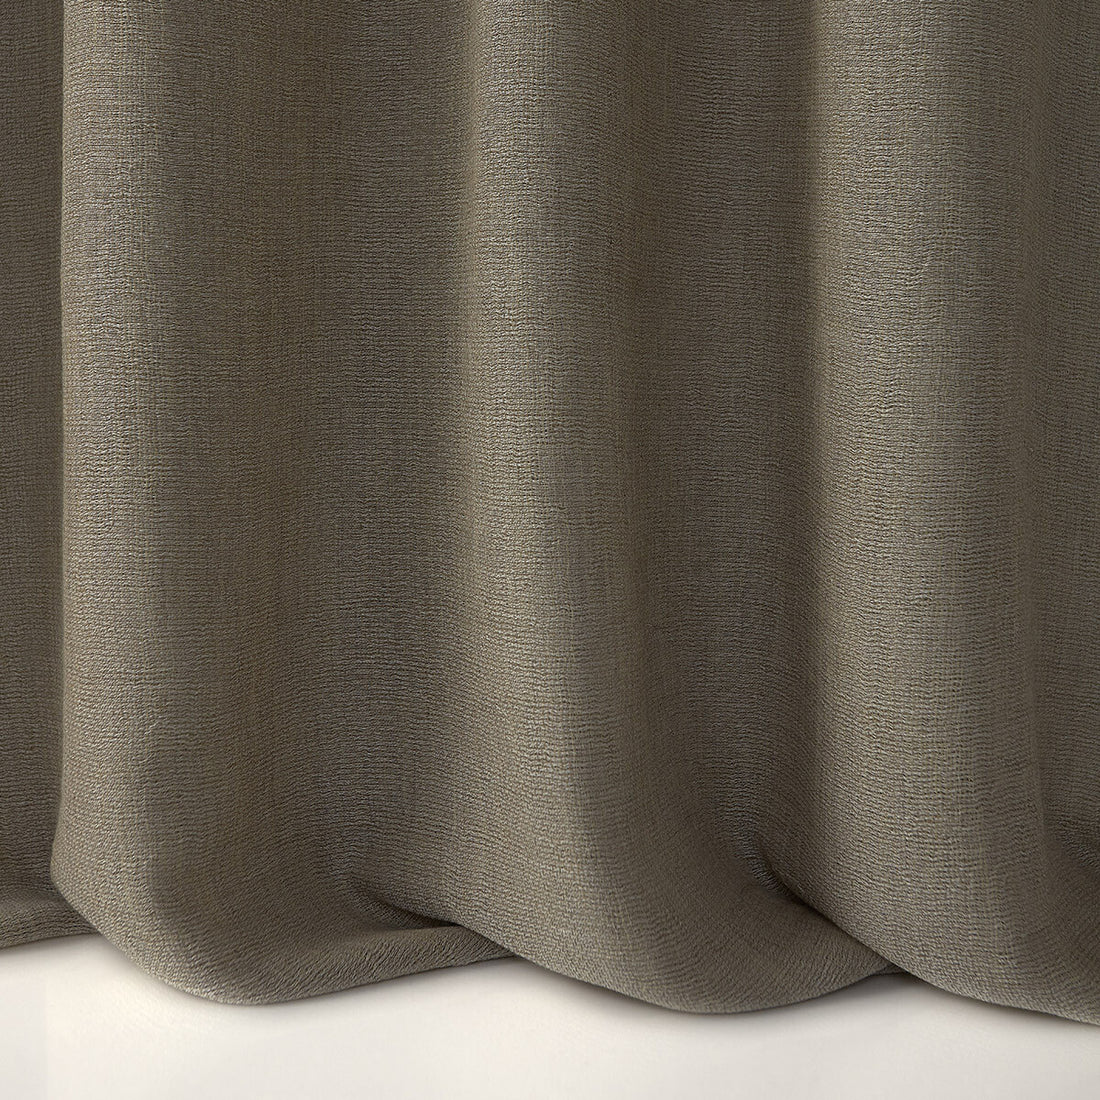 Rohe fabric in 1 color - pattern LZ-30342.01.0 - by Kravet Design in the Lizzo collection